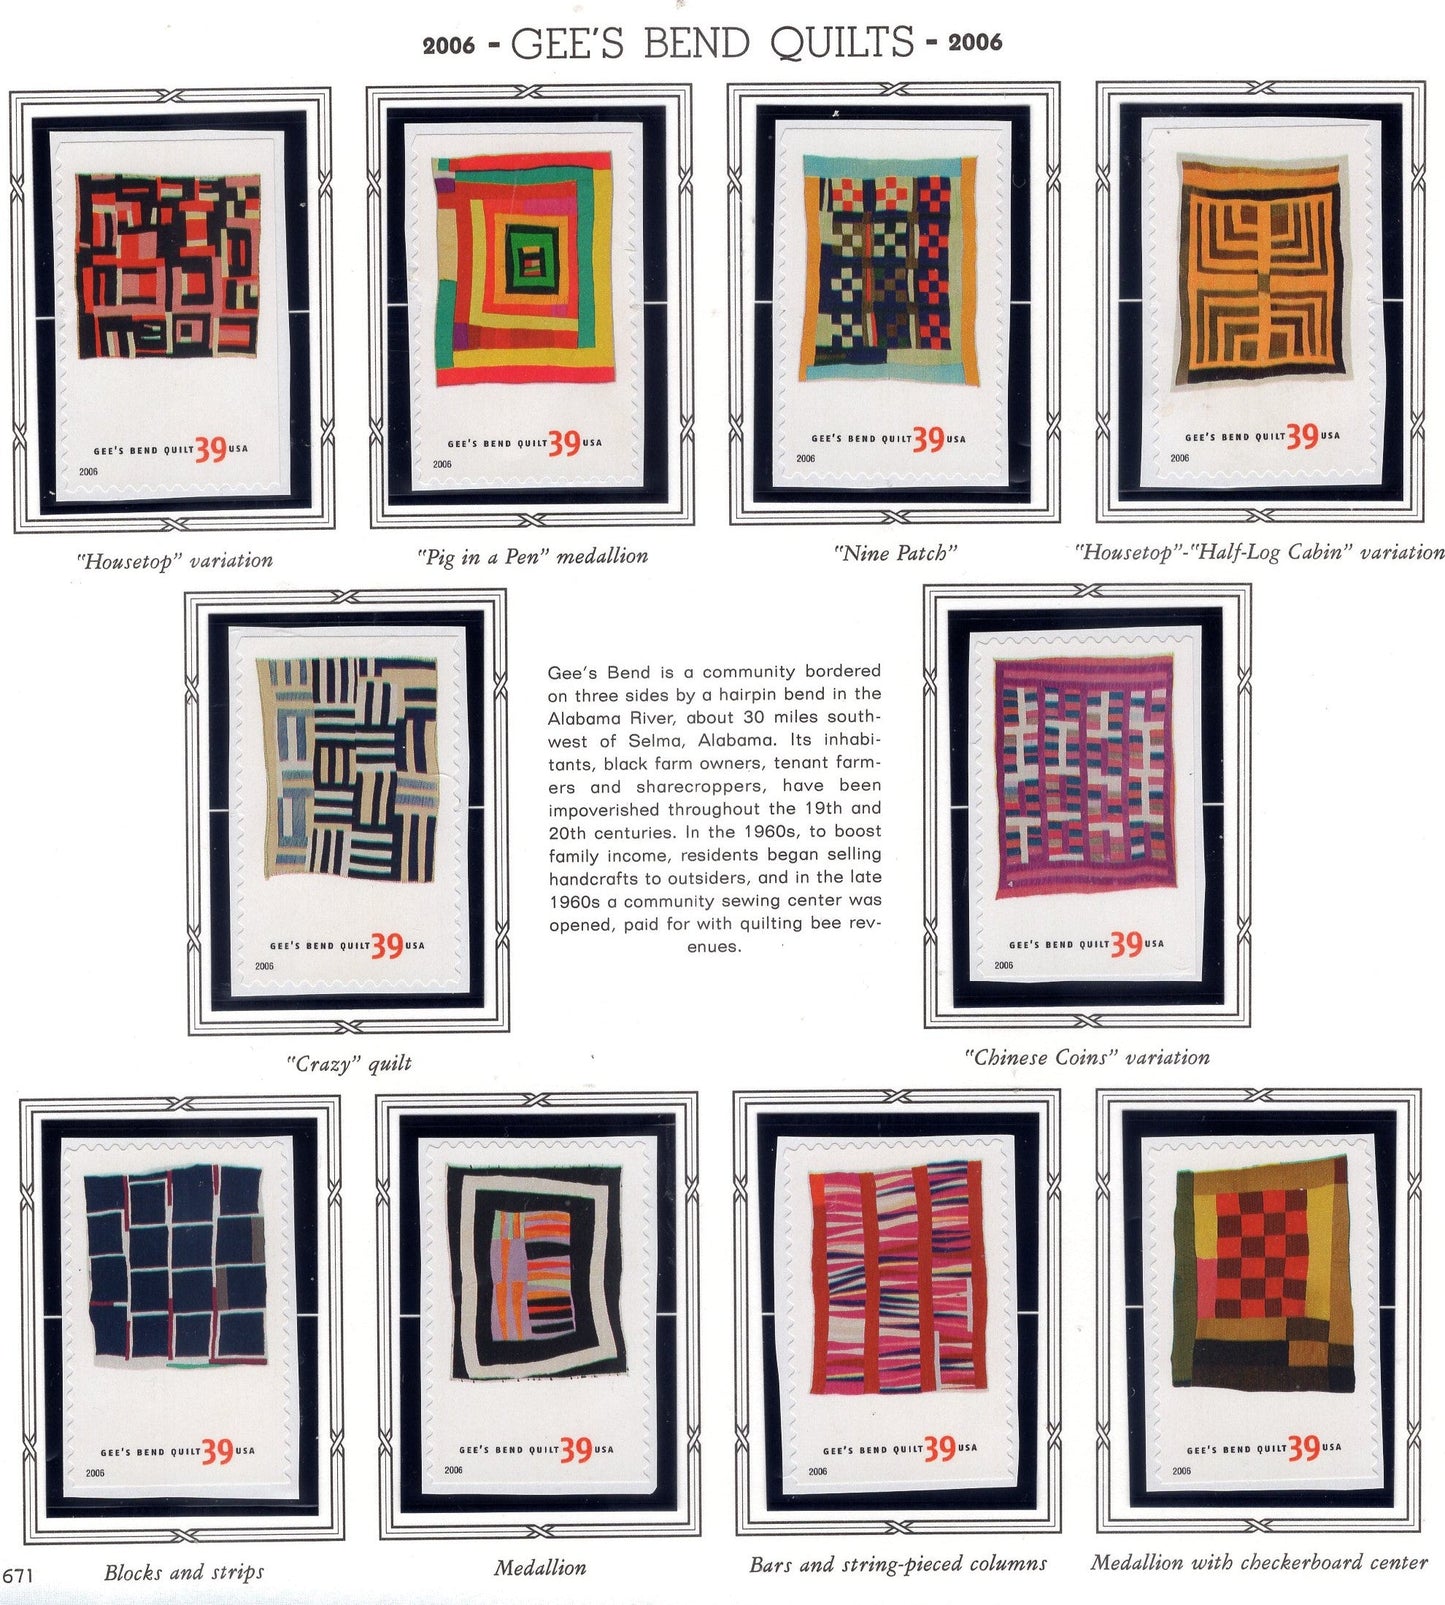 GEE'S BEND QUILTS 10 Individual Black American Treasure Crafts Commemorative Stamps - Issued in 2006 - ALBUM PAGE NOT INCLUDED - s4089